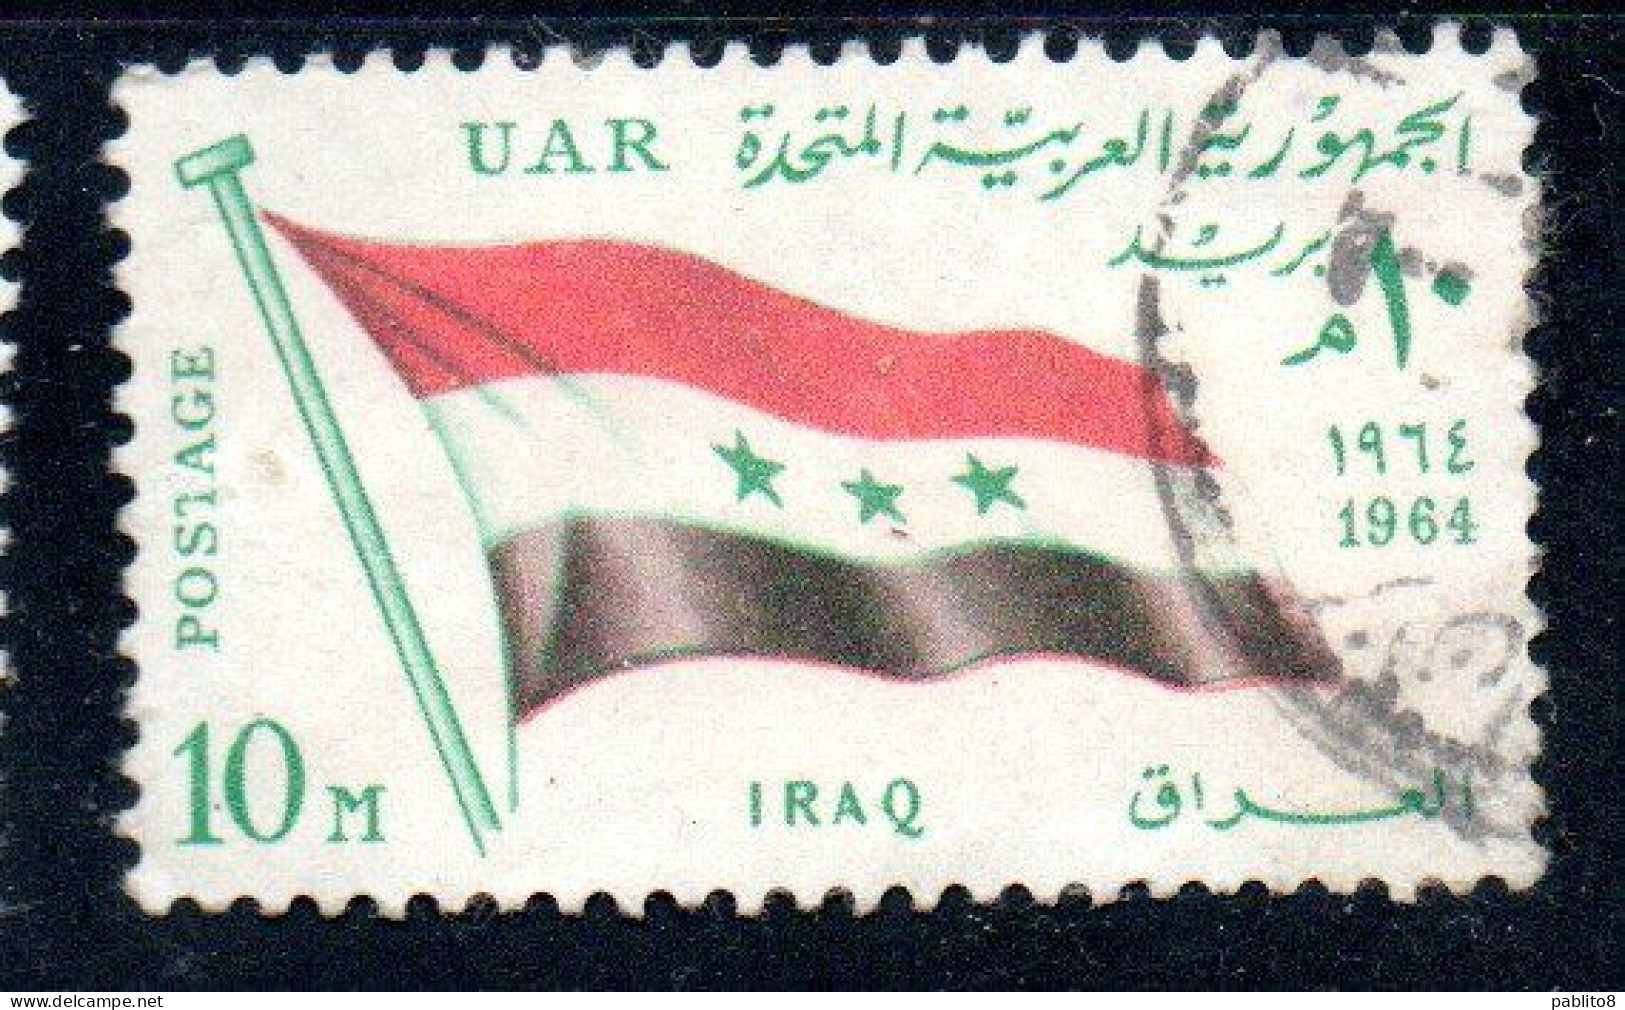 UAR EGYPT EGITTO 1964 SECOND MEETING OF HEADS STATE ARAB LEAGUE FLAG OF IRAQ 10m USED USATO OBLITERE' - Oblitérés